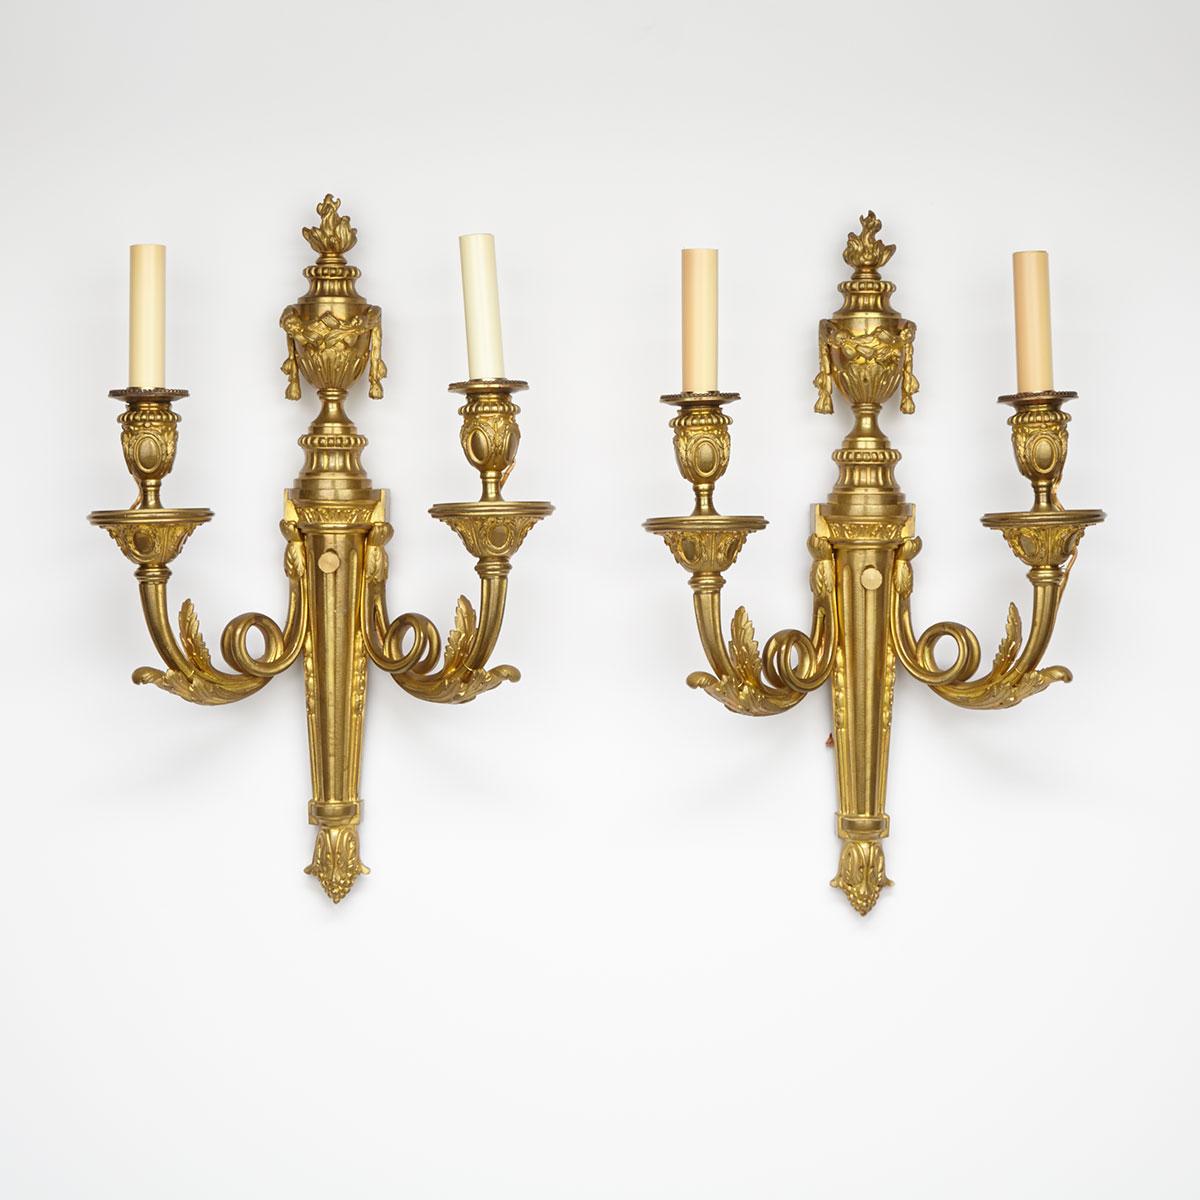 Pair of French Gilt Bronze Two Light Wall Sconces, mid 20th century